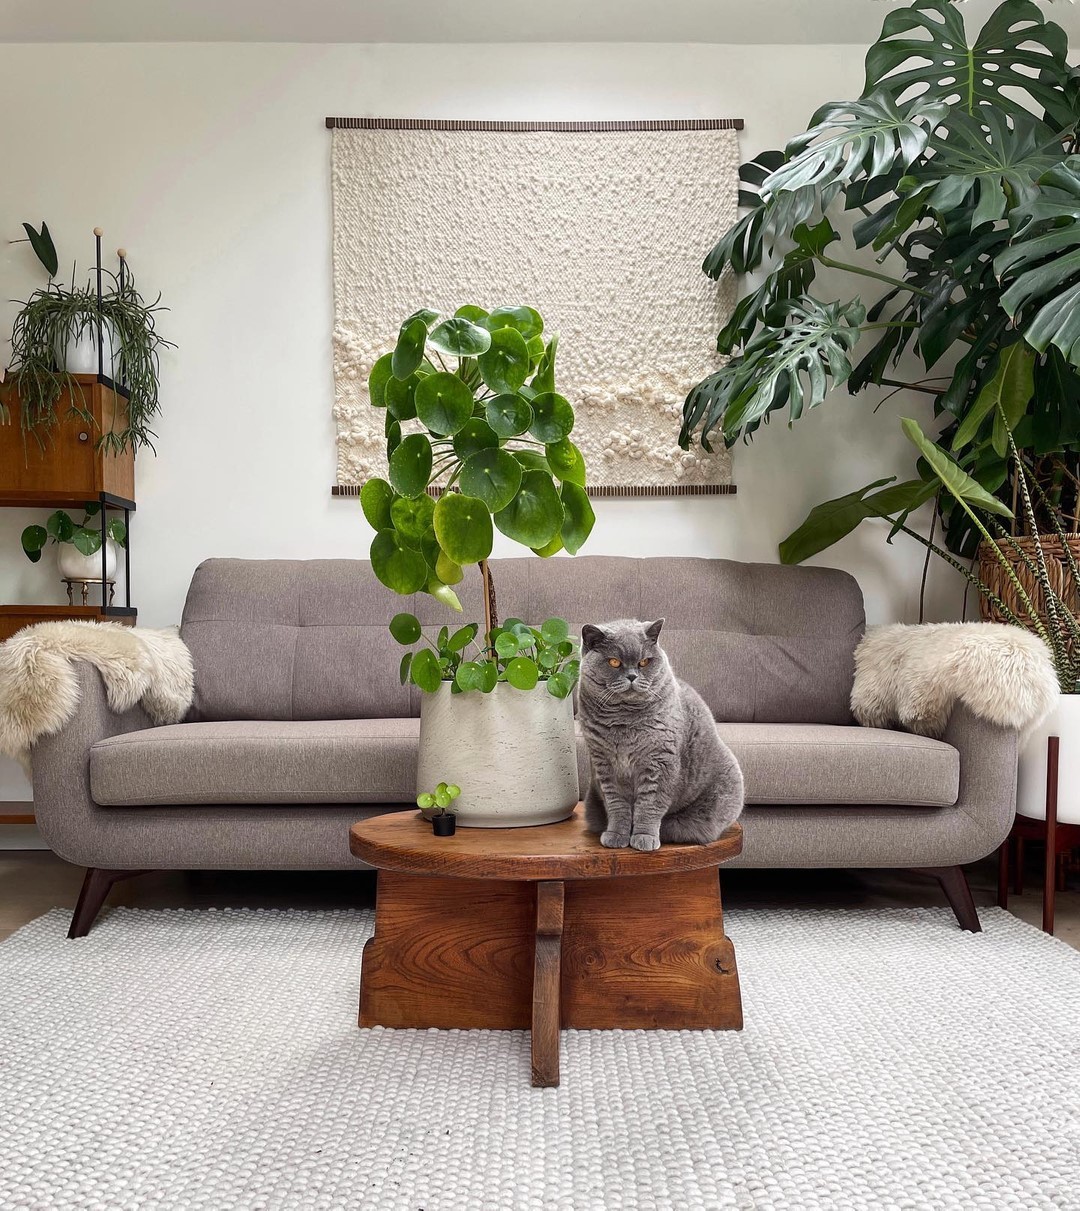 10-special-or-rare-houseplants-to-add-to-your-urban-jungle-featured